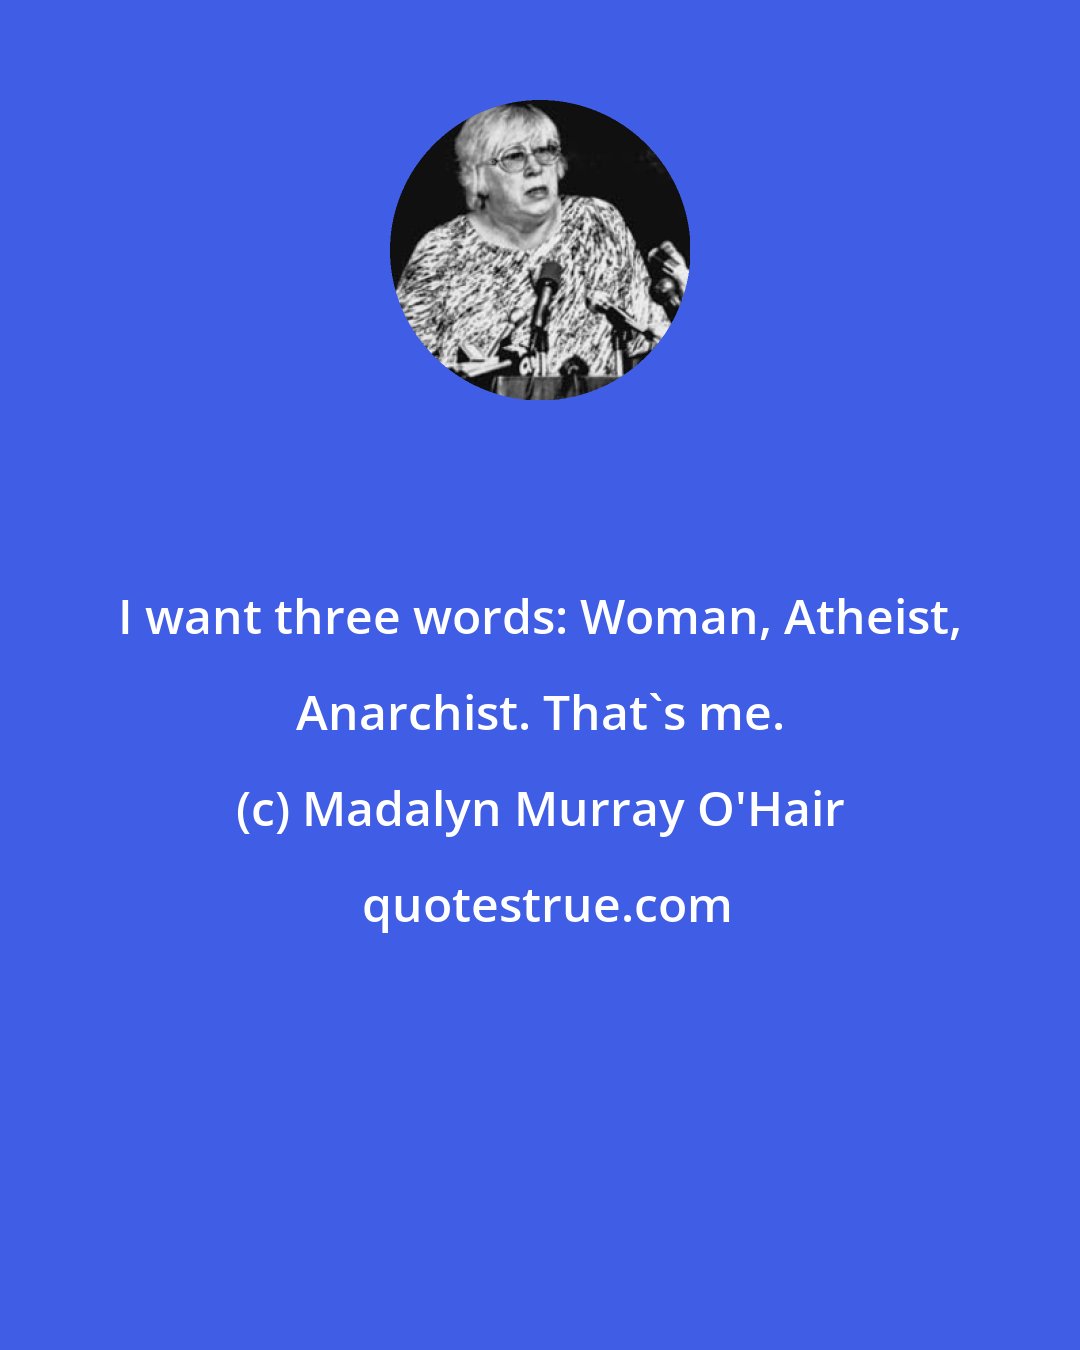 Madalyn Murray O'Hair: I want three words: Woman, Atheist, Anarchist. That's me.